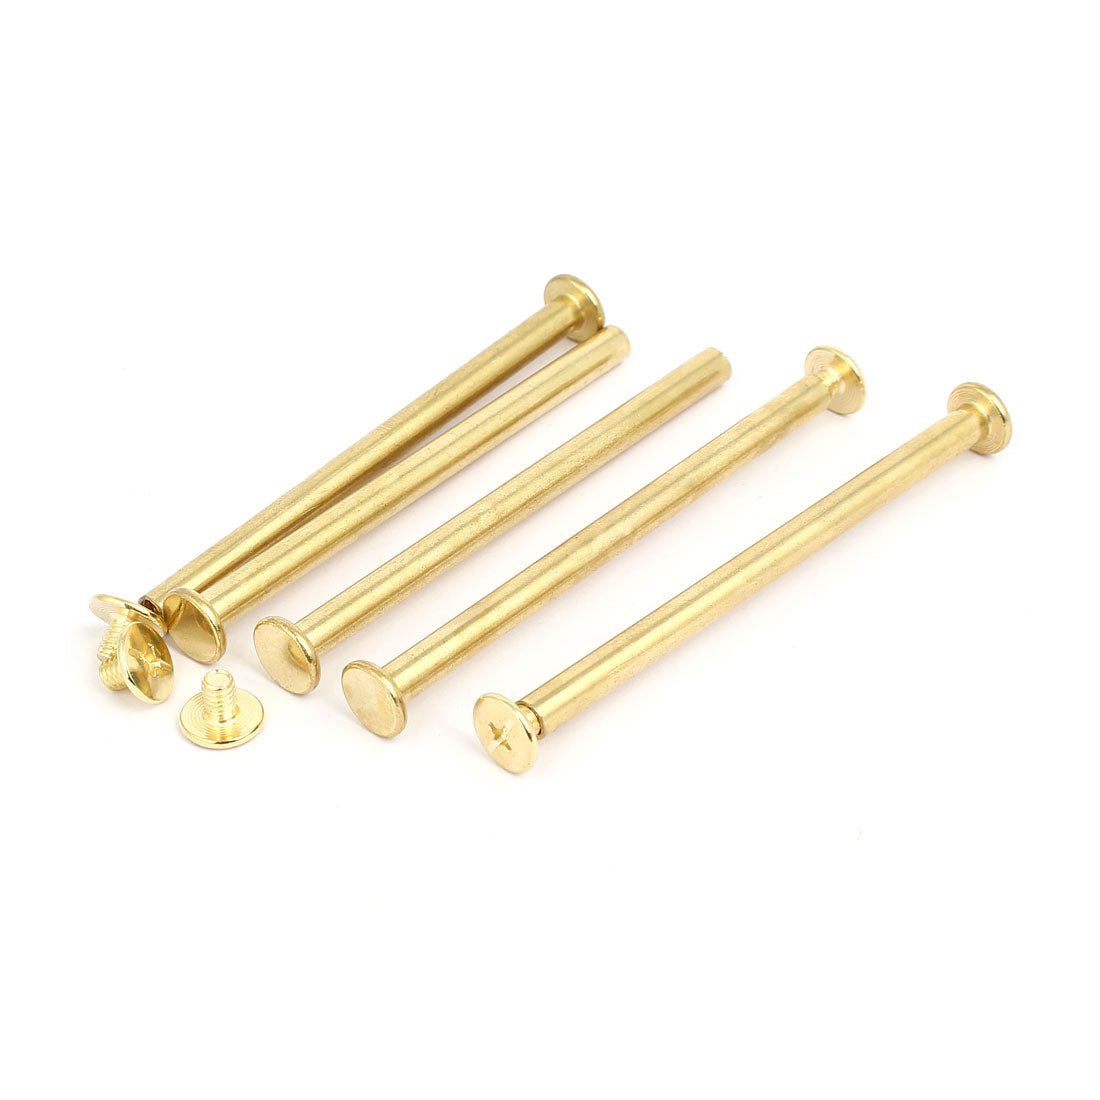 uxcell Uxcell M5x80mm Binding Screw Post Gold Tone 5pcs for Photo Albums Scrapbook